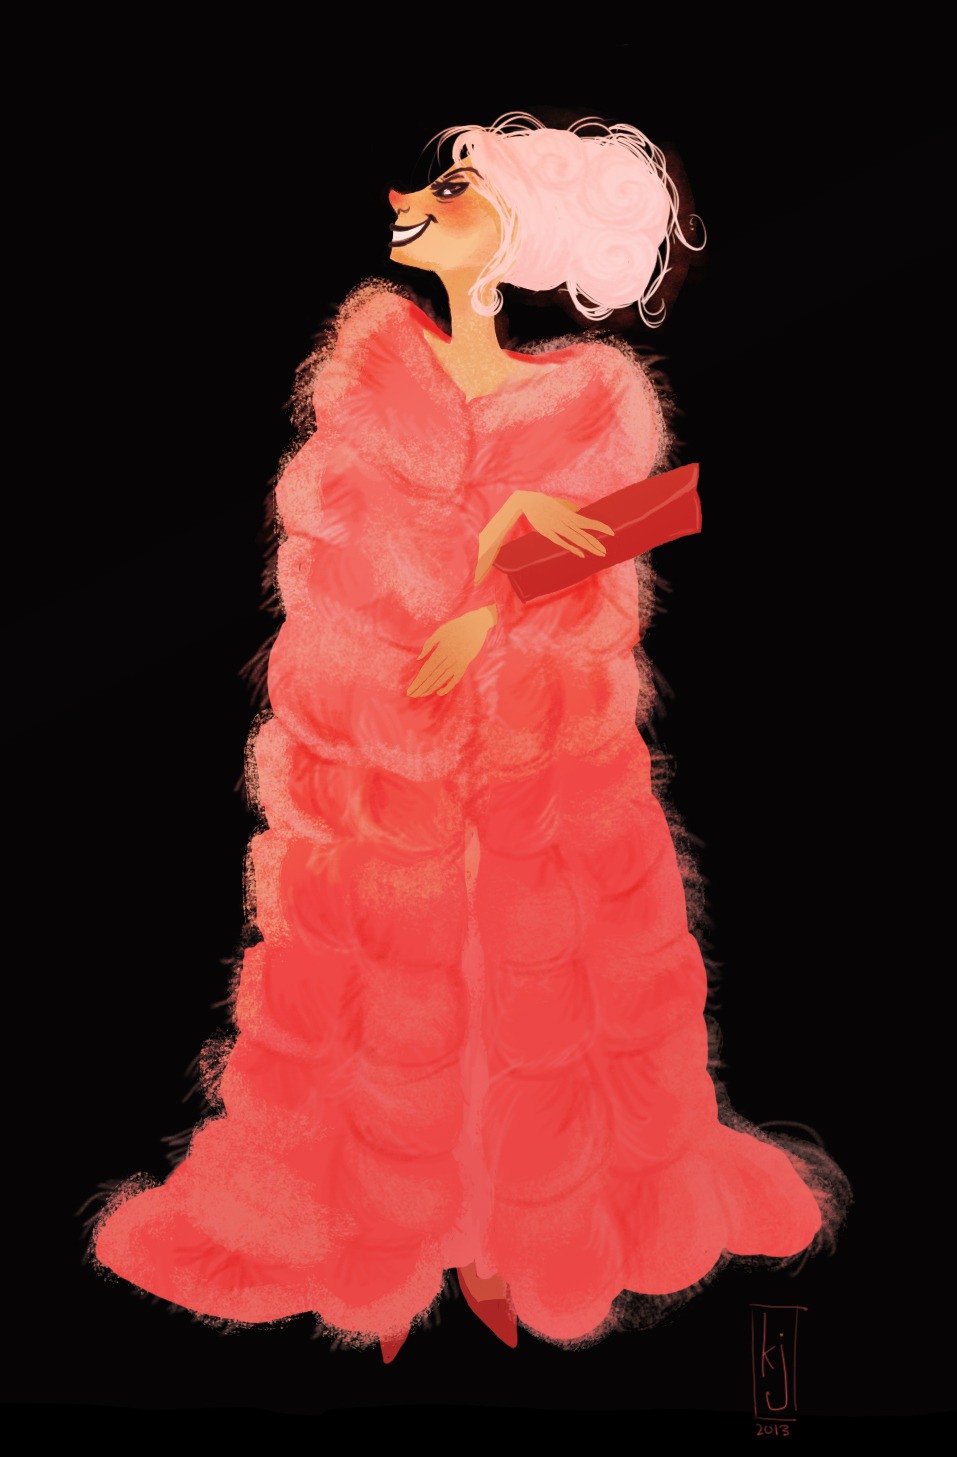 Pink Shirley by Karly Jade on Tumblr {Based on Shirley Maclaine in What A Way To Go!, 1964}